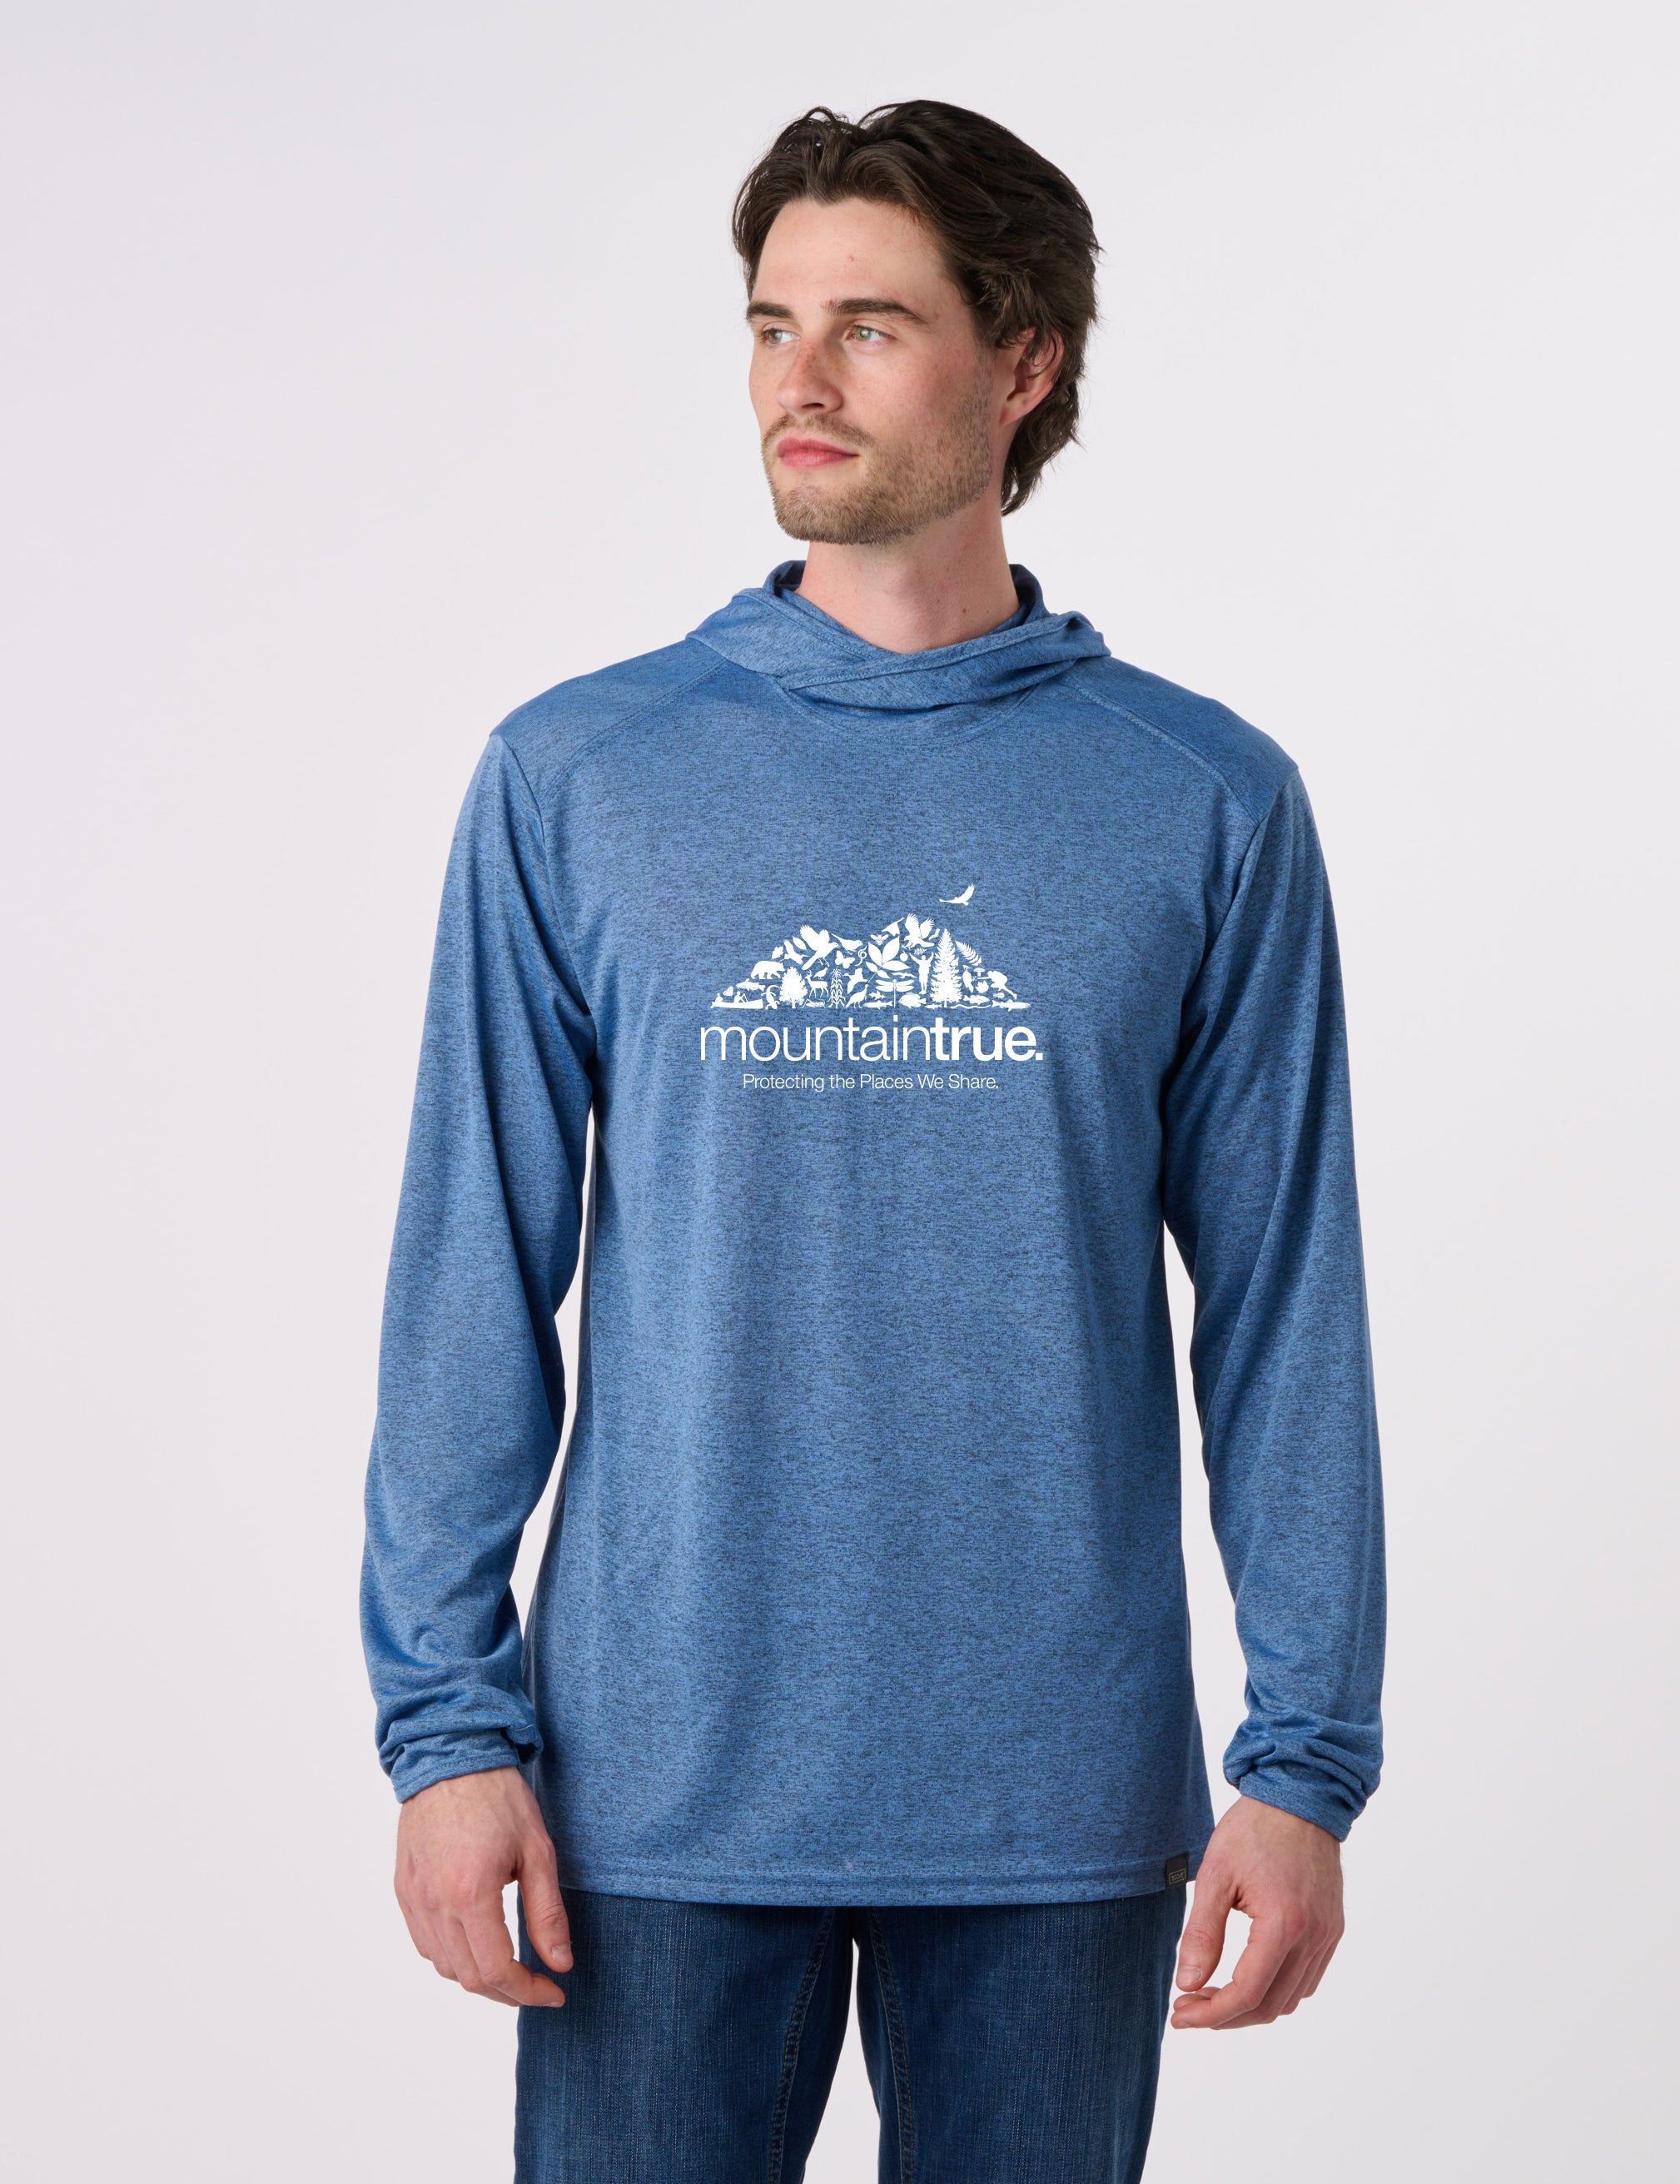 RECOVER_RD4000_SPORTSUNHOODIE_BLUEHEATHER_FRONT_a884cd5f-bed8-4284-acdb-82db350e03e7.jpg